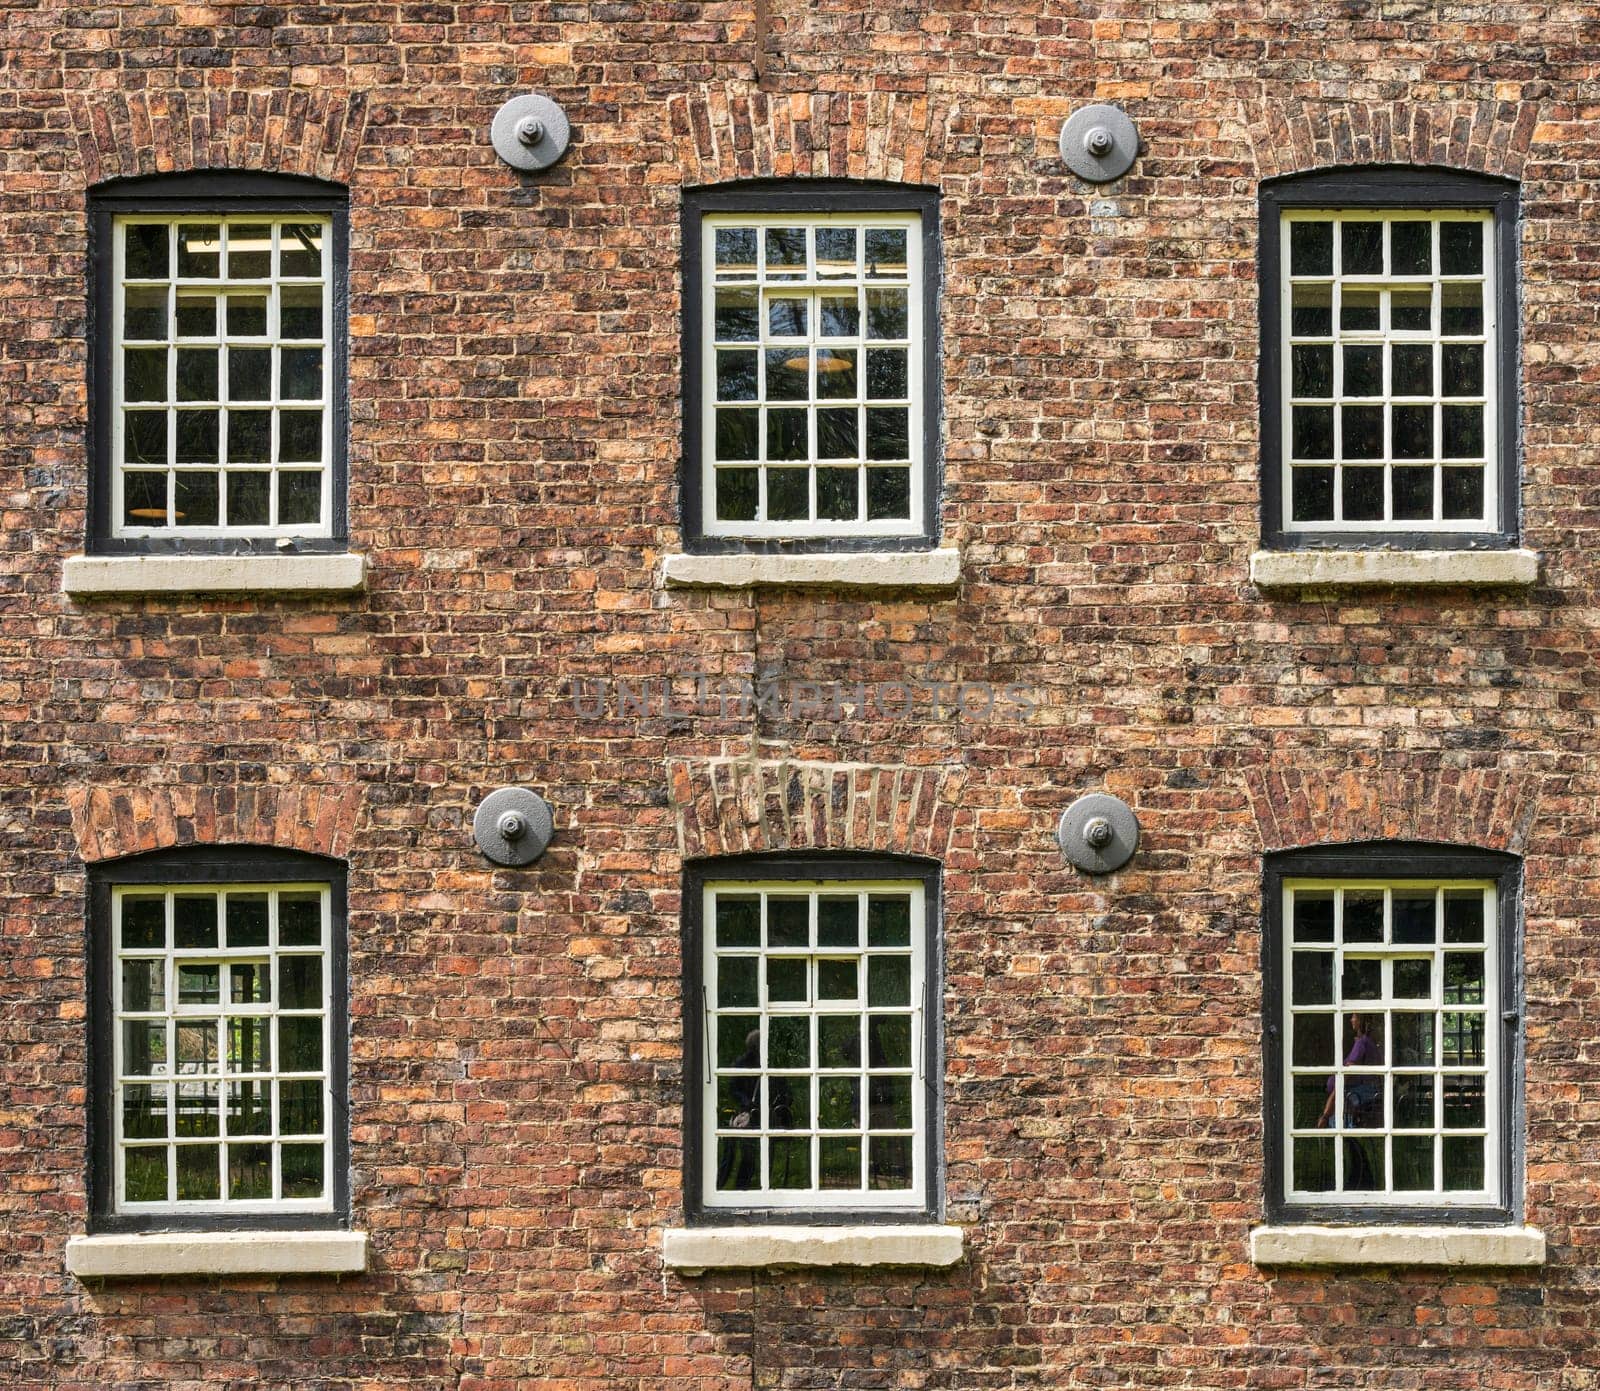 Exterior of restored cotton spinning and weaving mill in north of England with focus on windows